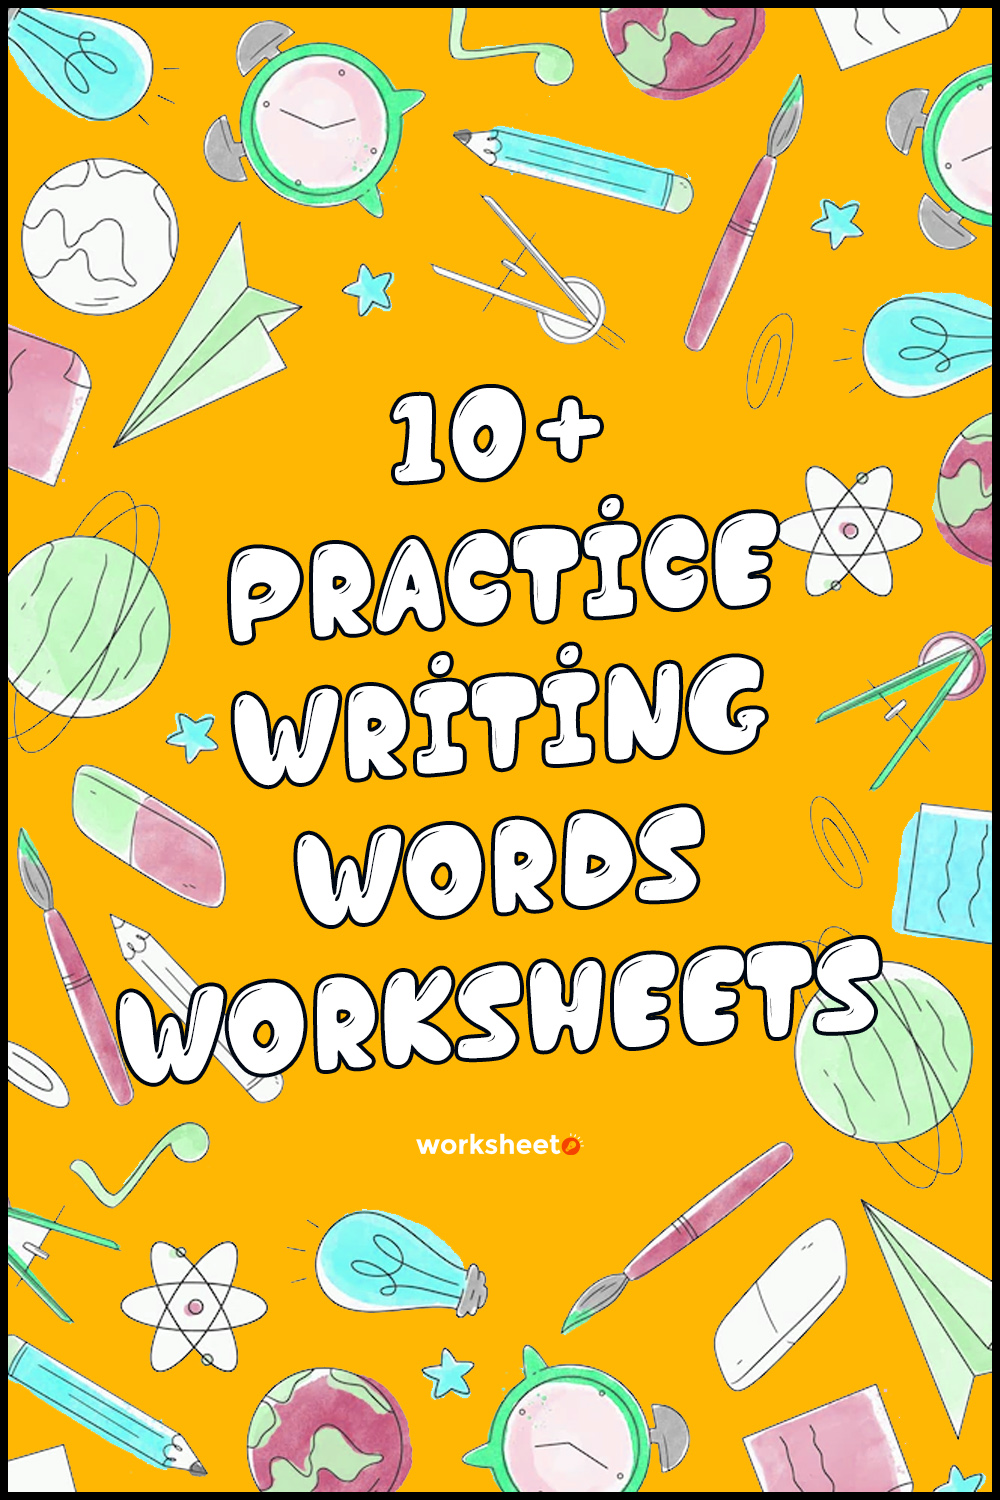 16 Images of Practice Writing Words Worksheets